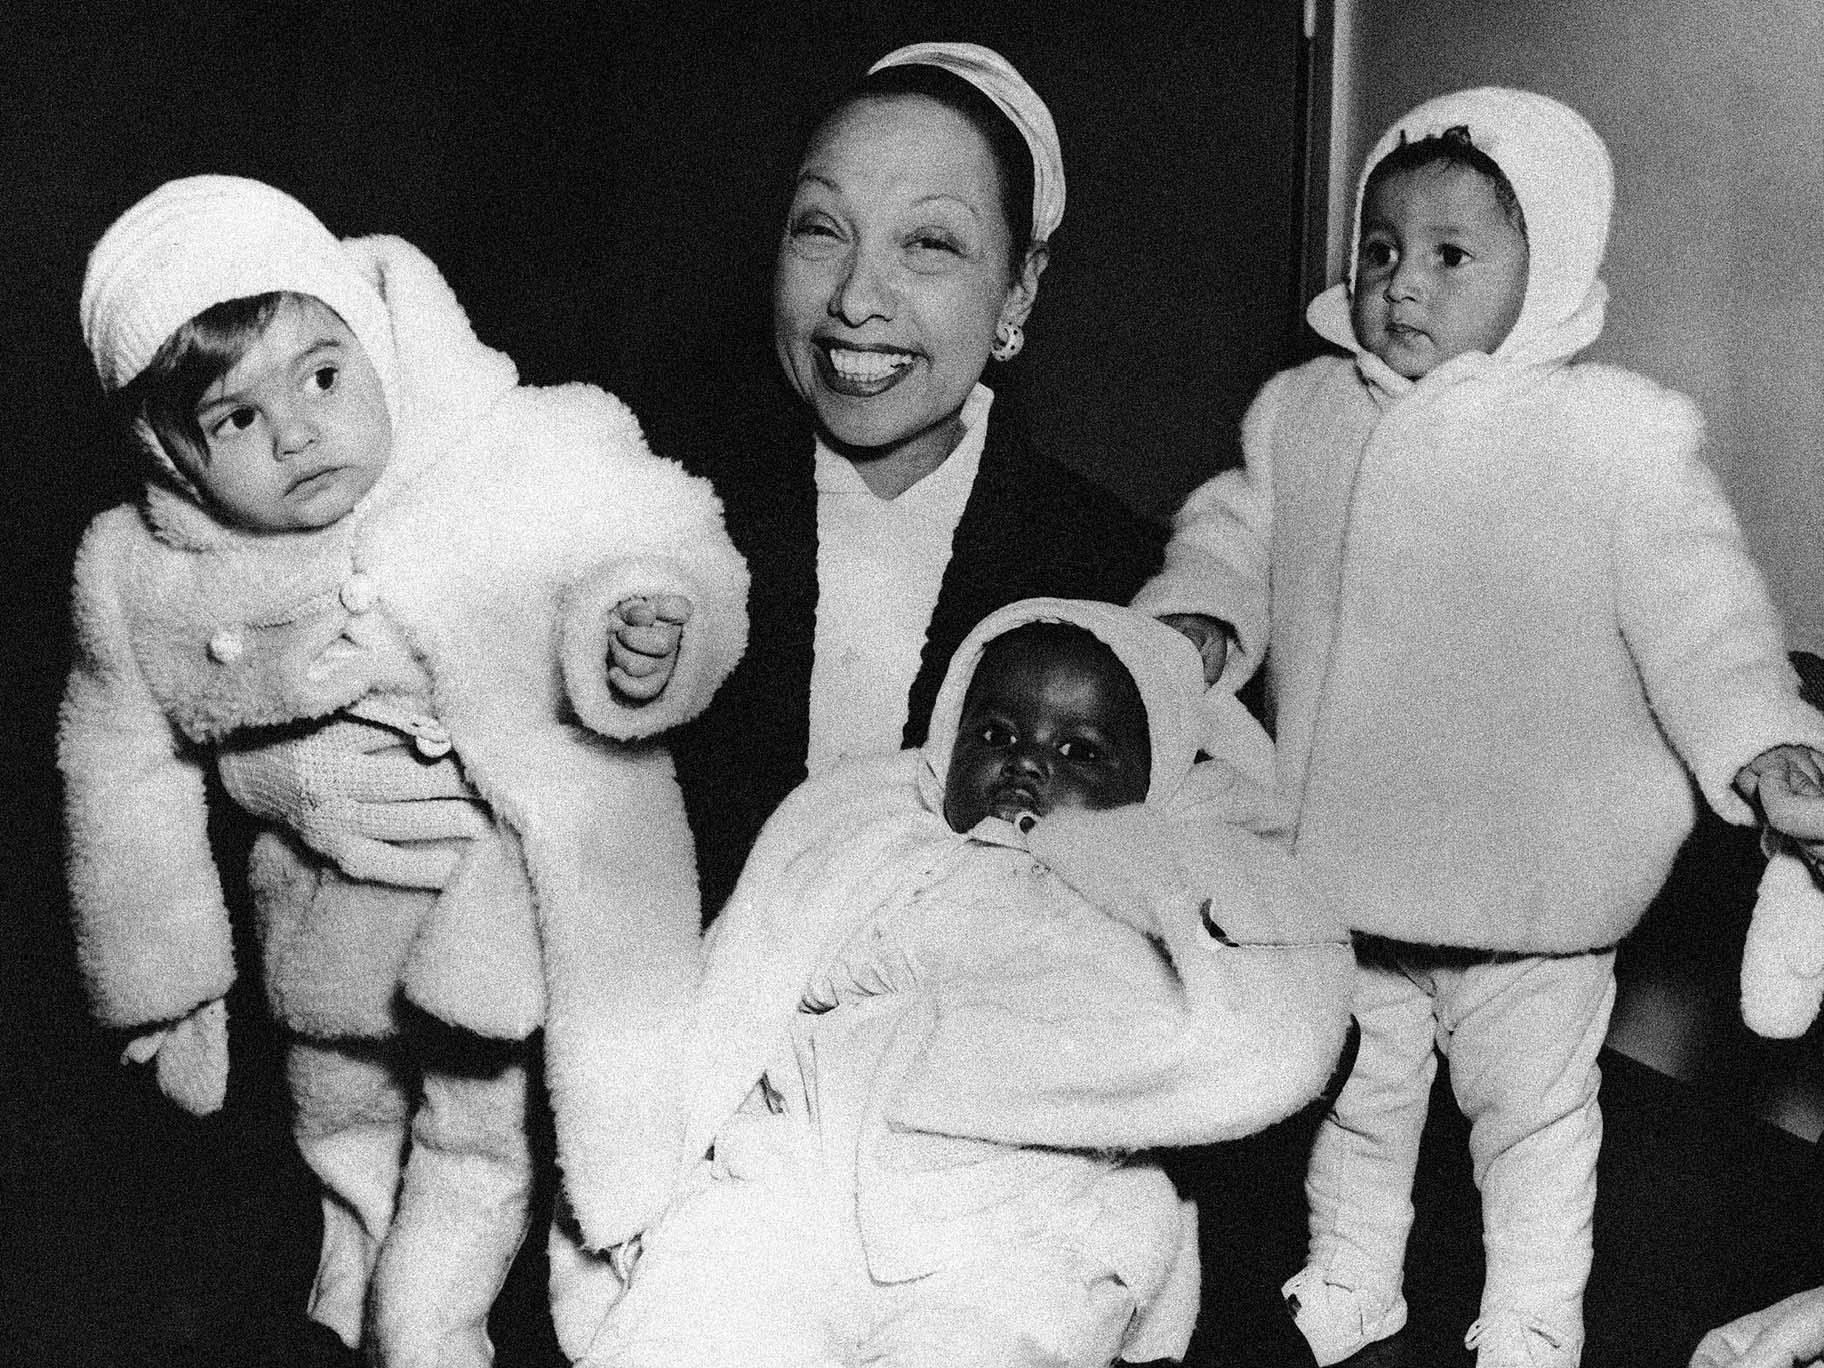 Actress Josephine Baker in her apartment at the Hotel Forresta near Stockholm, Sweden on Dec. 7, 1957, with three of her adopted children, Marianne, left, Koffi, center, and Brahim. (AP Photo, File) 